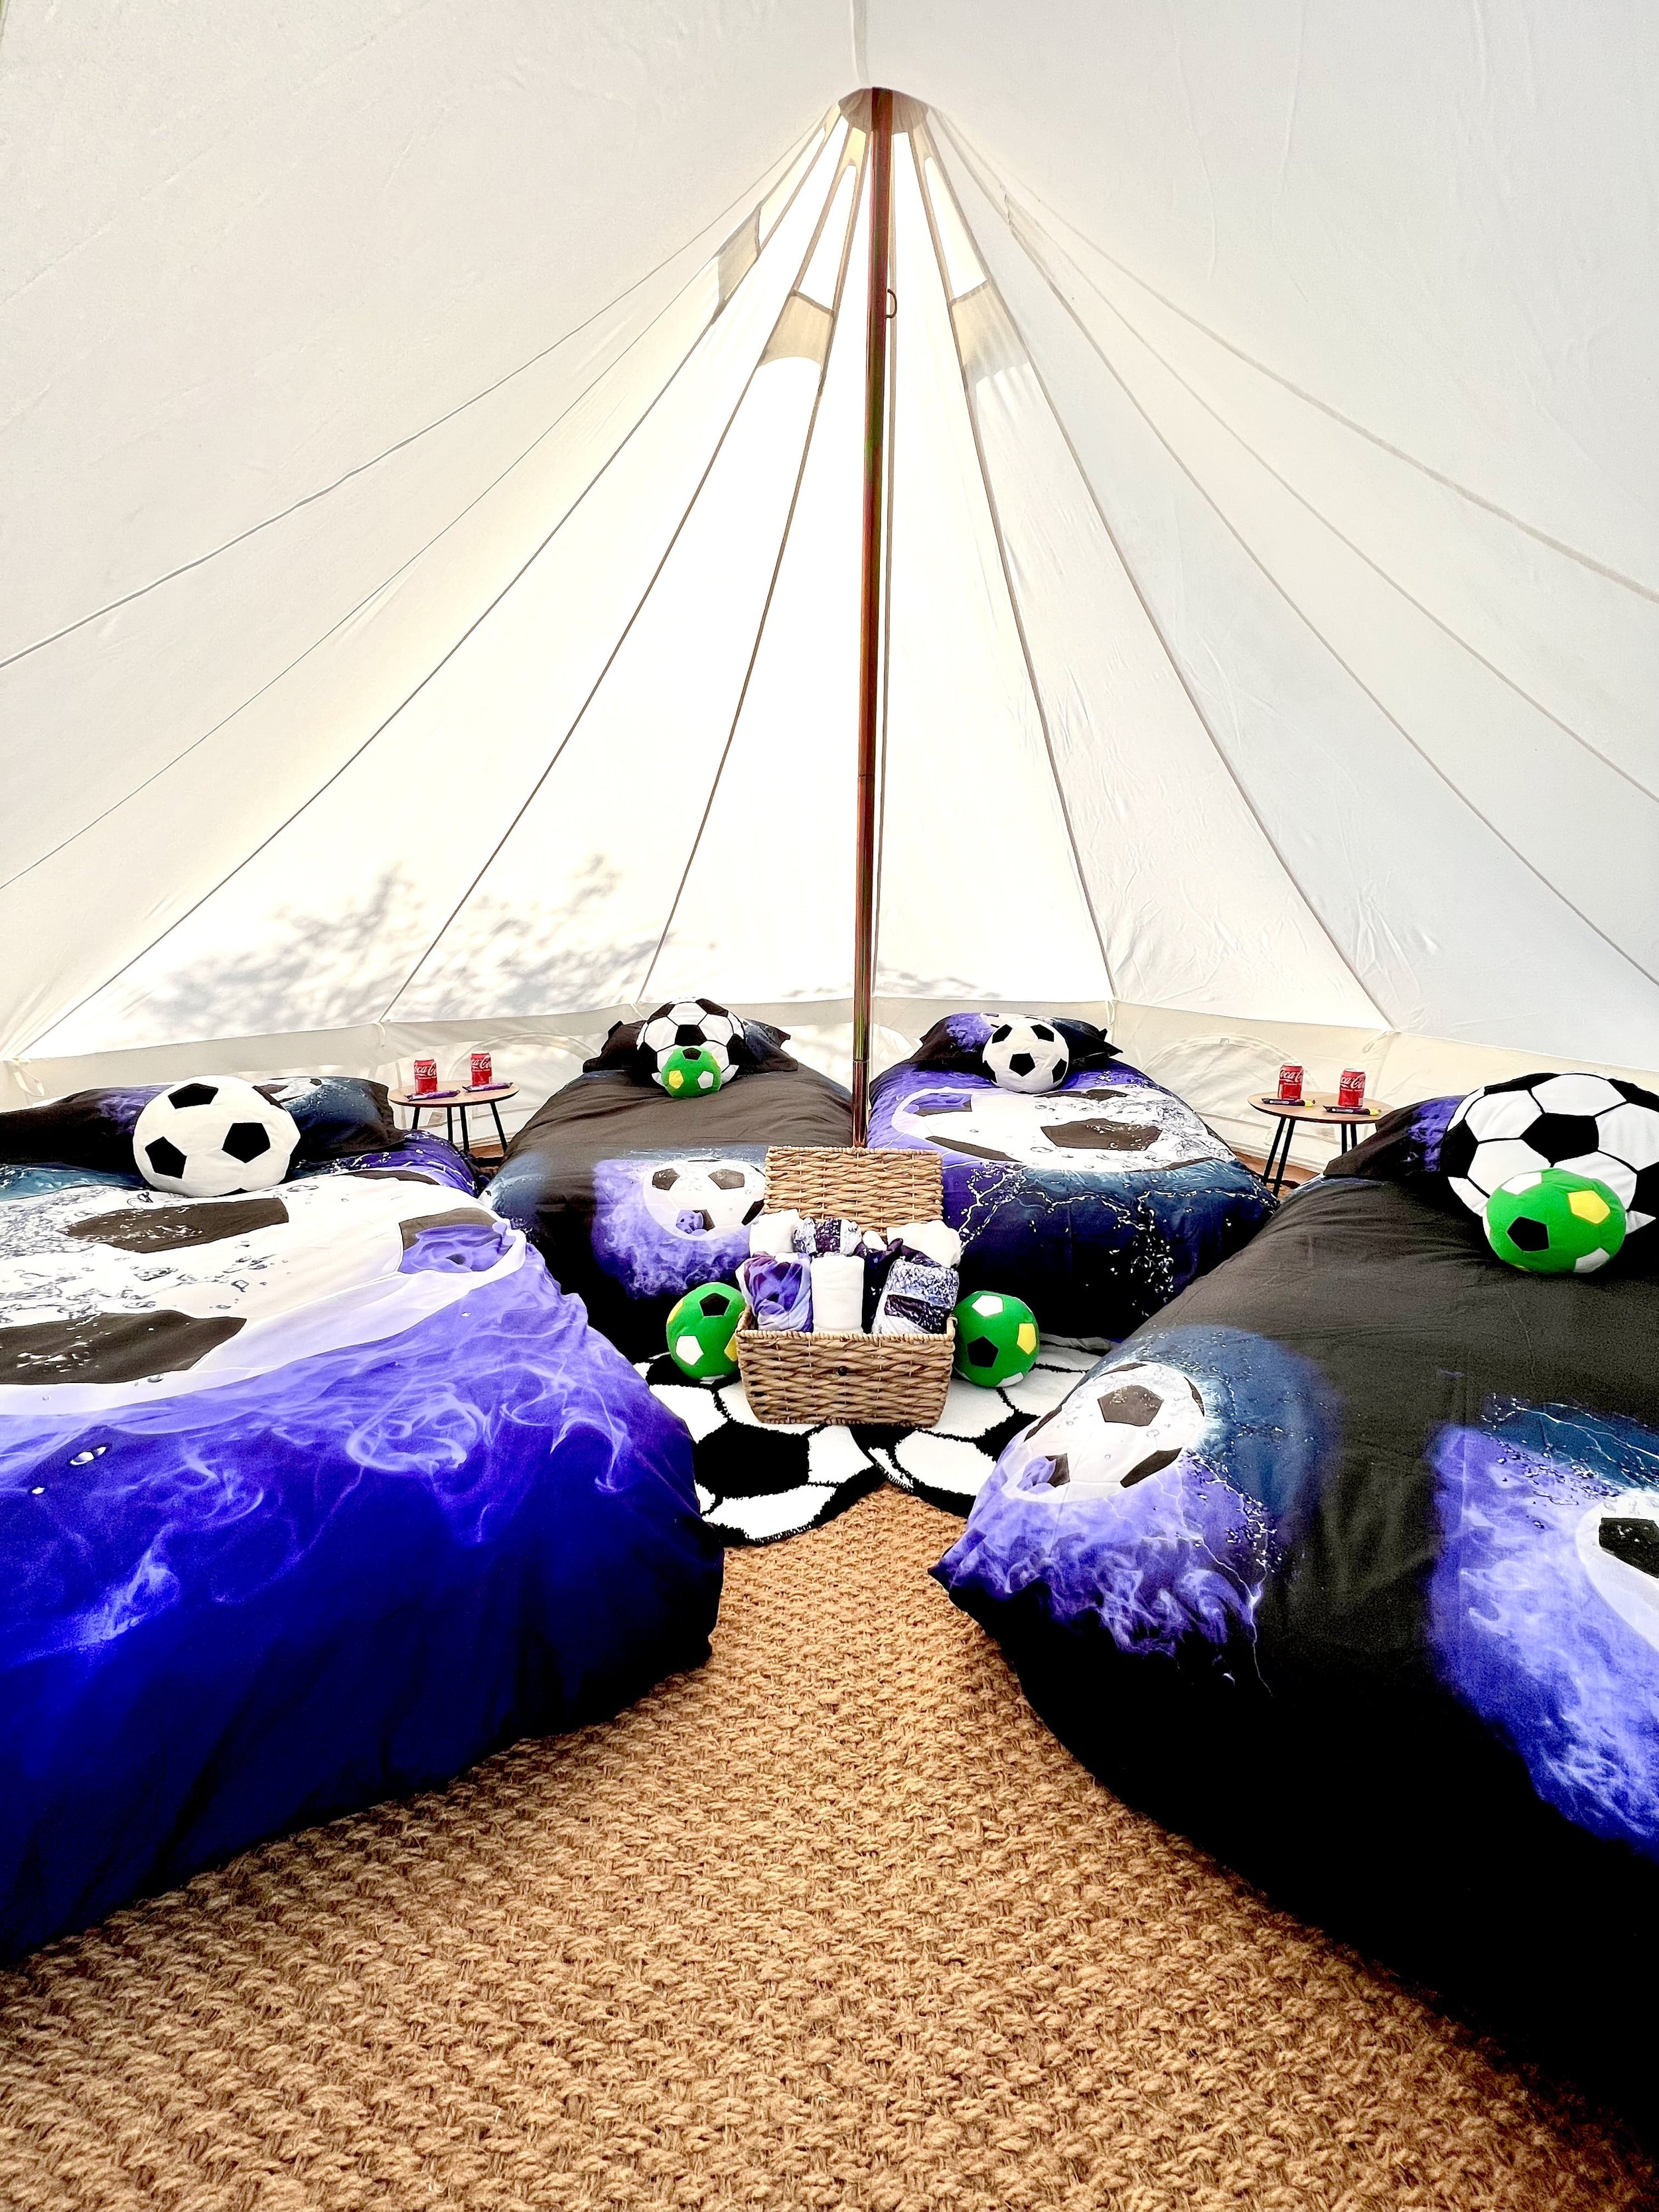 Breathtaking Bell Tents - Sleepover Party Tents in Hertfordshire